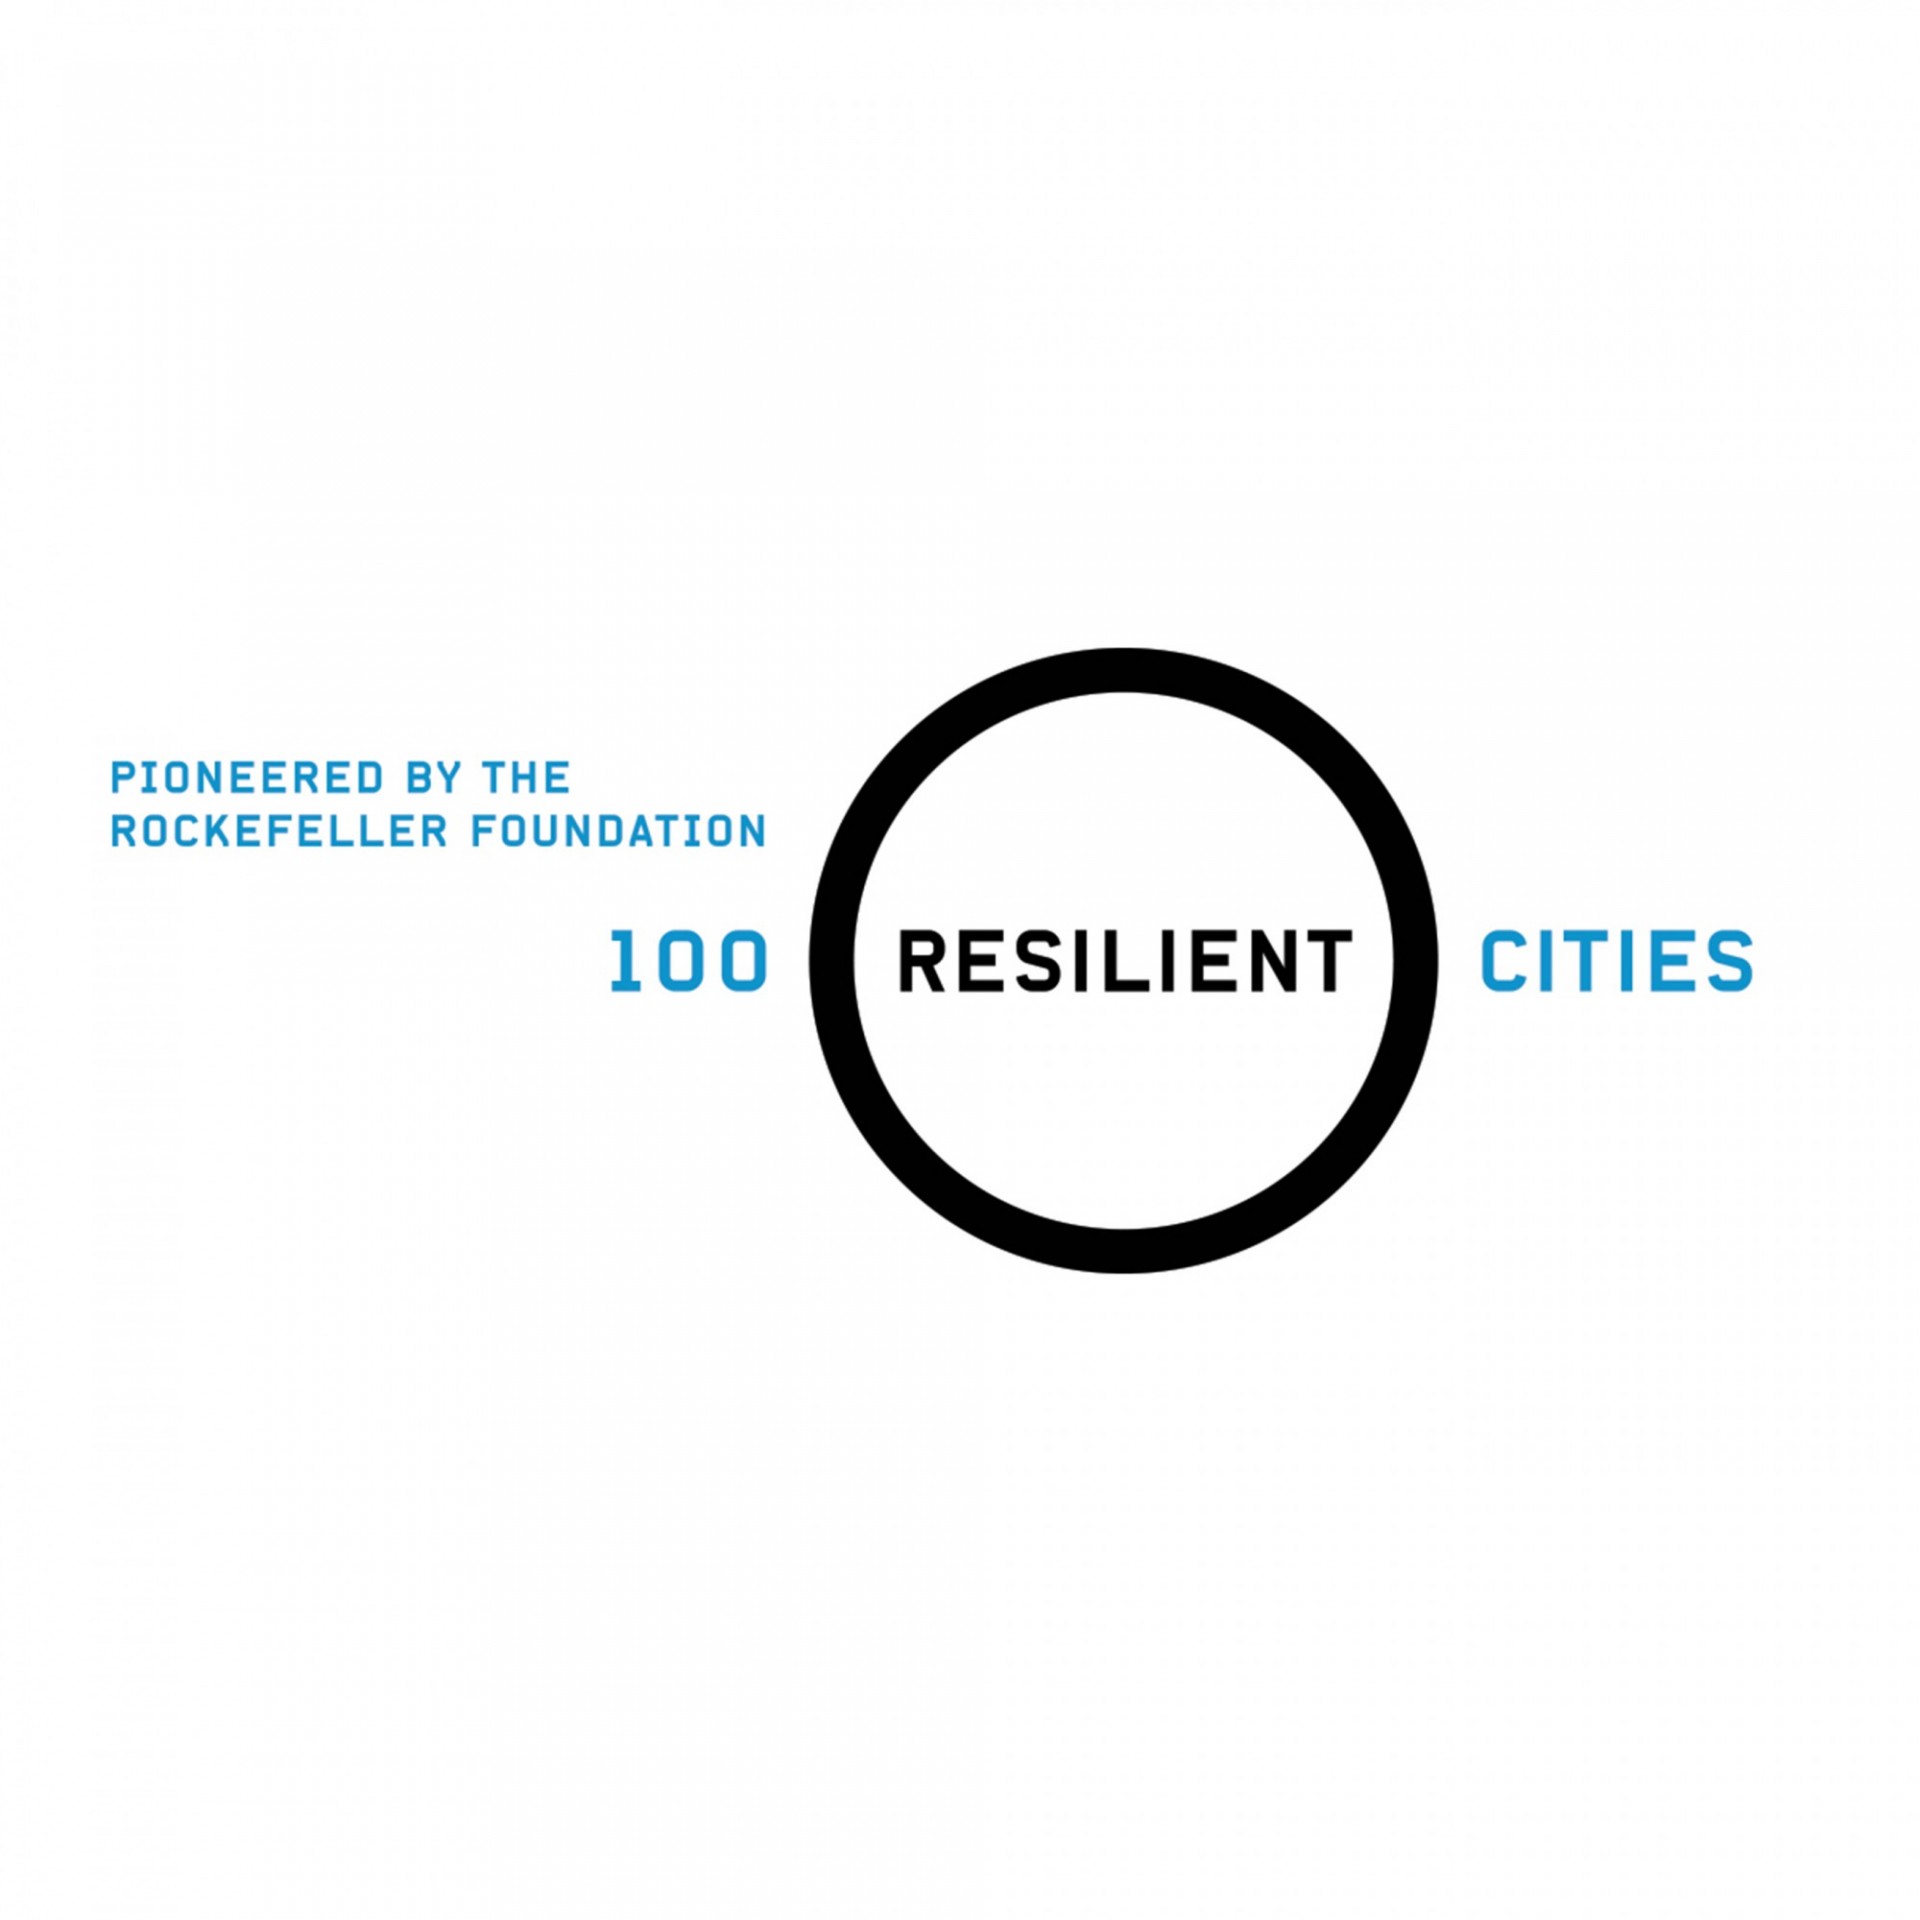 100 Resilient Cities - Pioneered by the Rockefeller Foundation